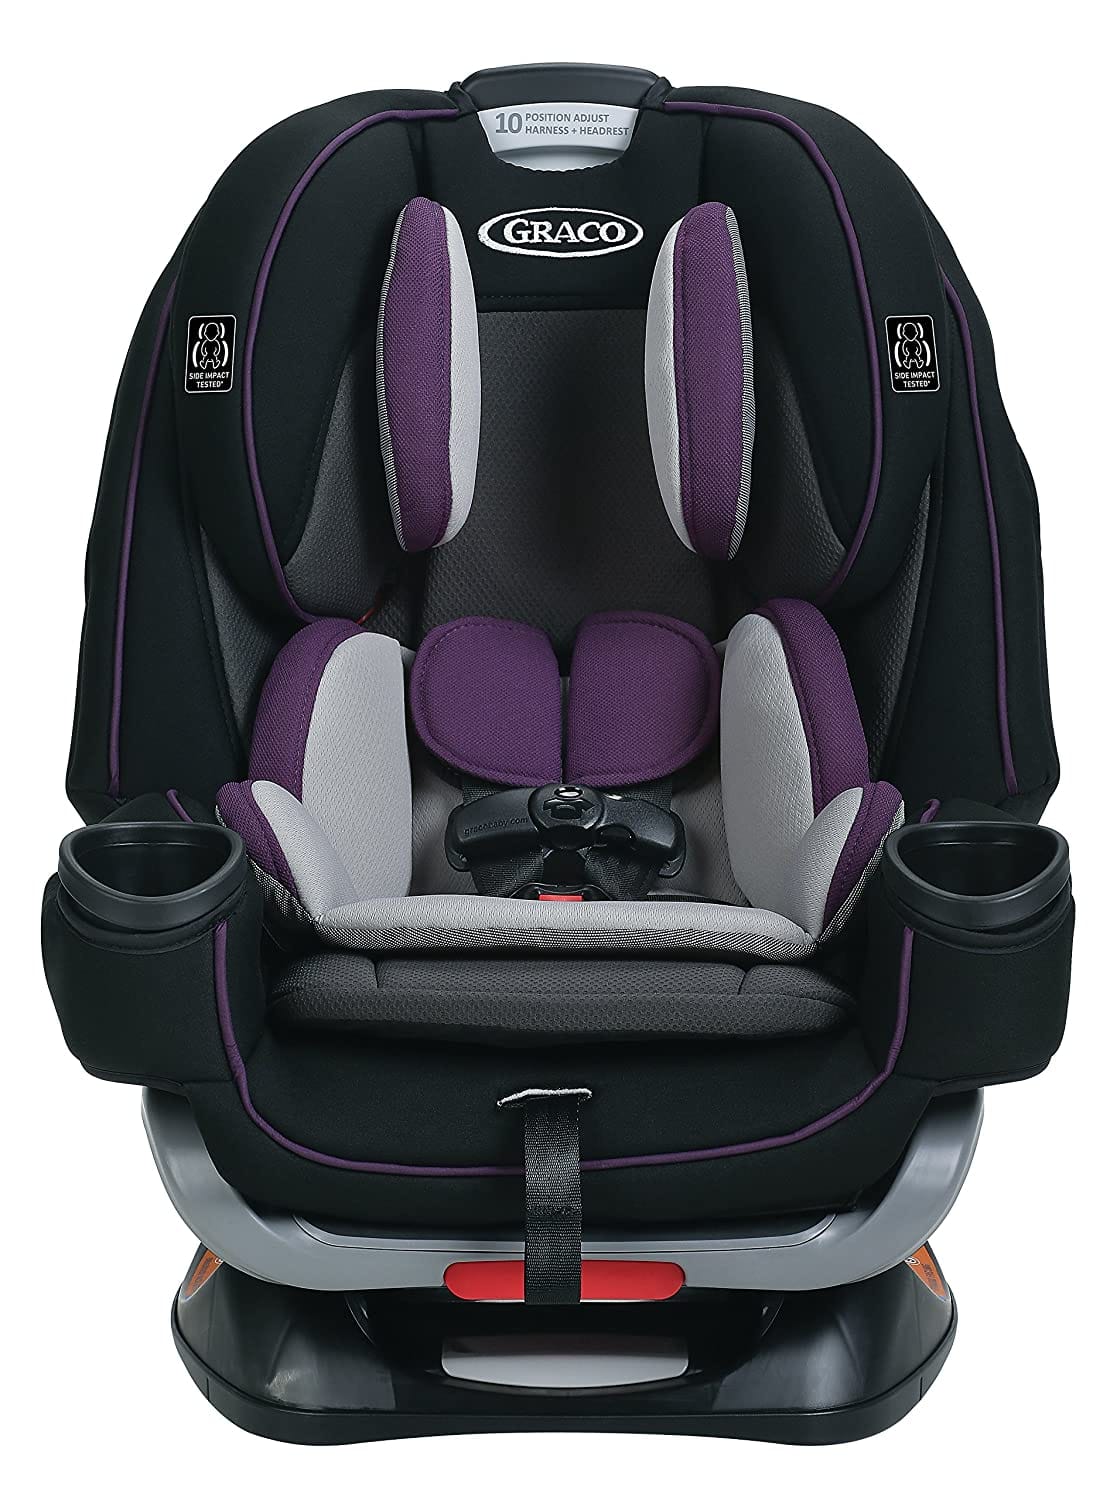 Graco Carseat Forever Extend To Fit 4-in-1 Convenient for You as it Transitions from Rear-Facing Infant Car Seat - Jodie - 2001872